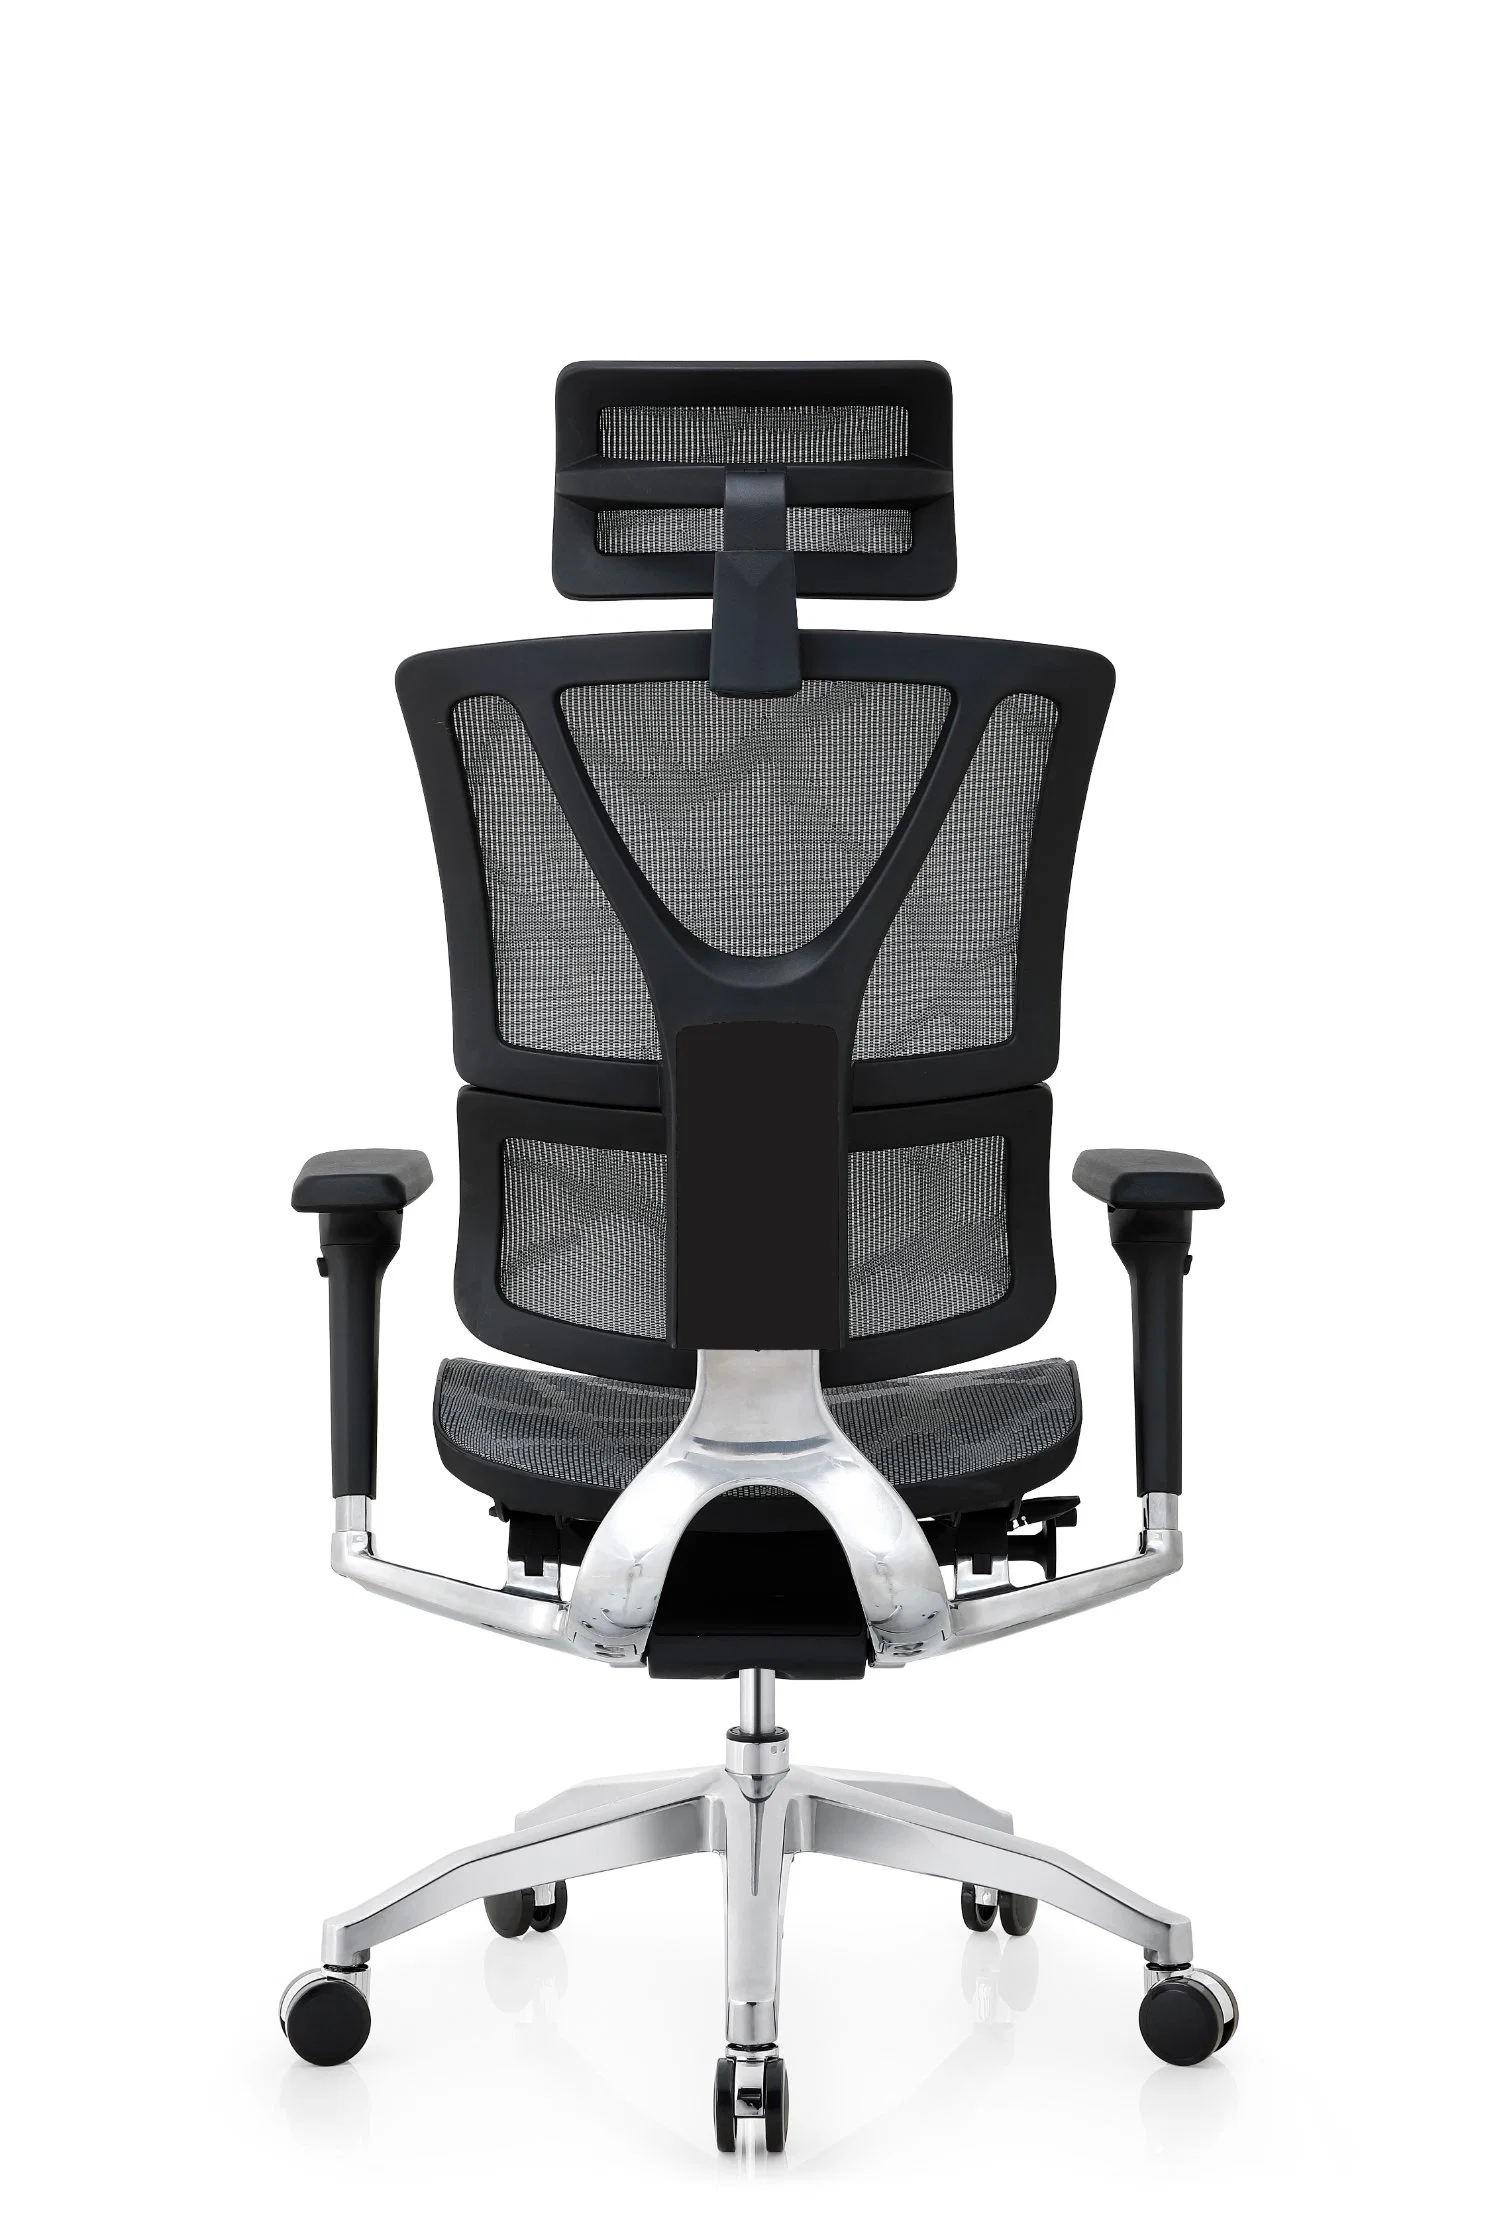 2022 Via Furniture High quality/High cost performance  Ergonomic with Modern Design SGS Certificate Mesh Office Swivel Chair for Office Home